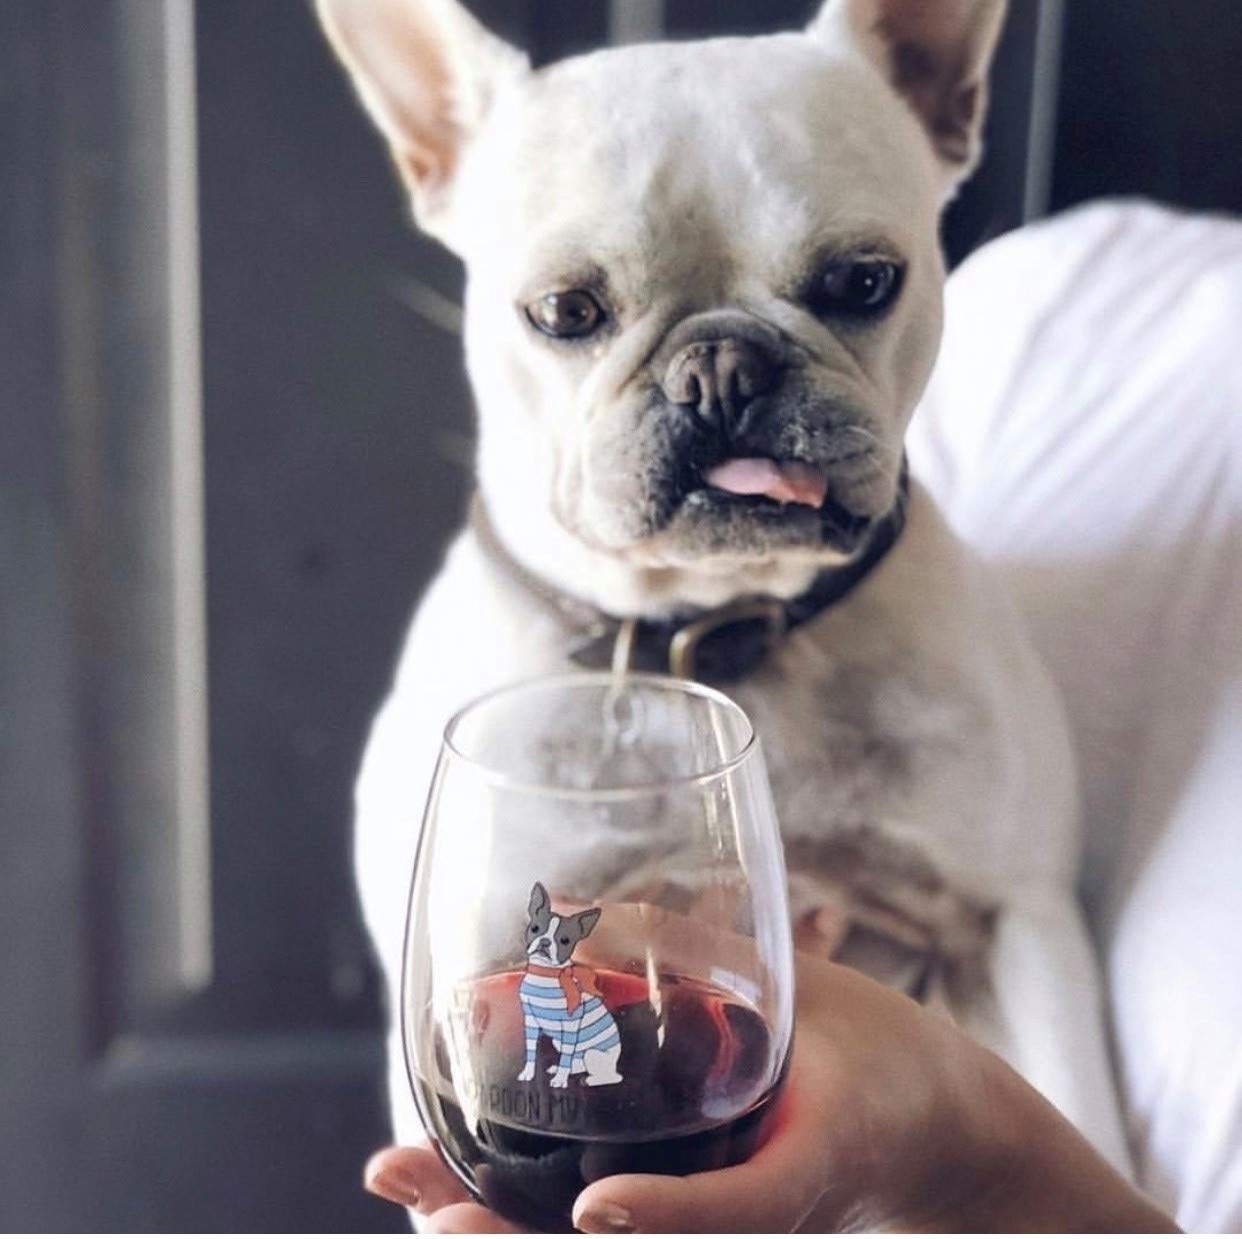 a dog looking at the wine glass of another dog